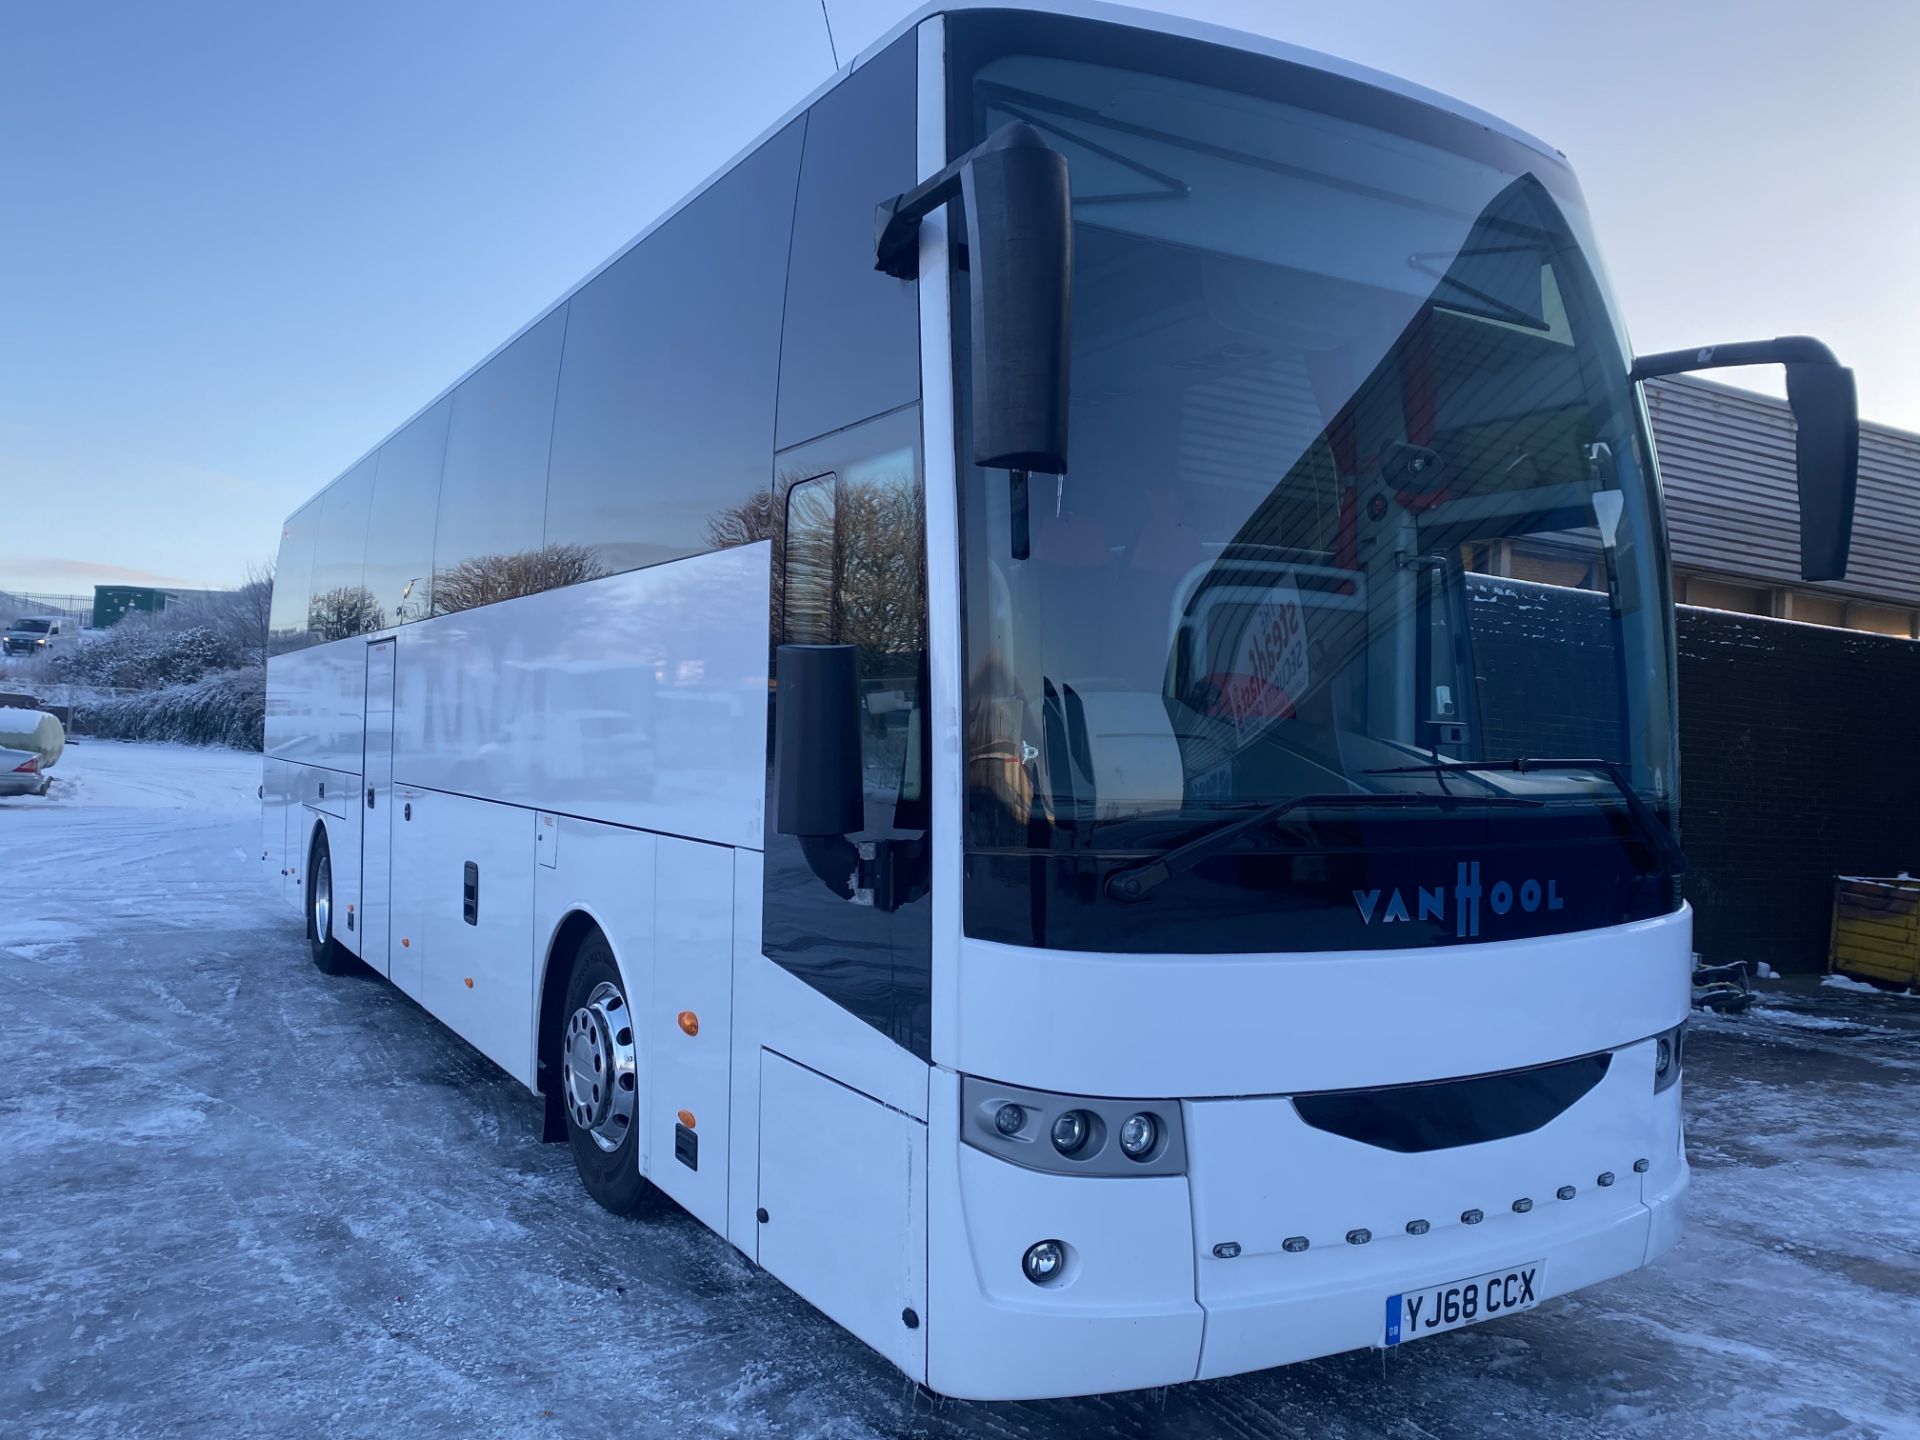 Vanhool EX15H auto 51+2 seater coach, Registration YJ68 CCX , first registered 1st January 2019, 1 - Image 2 of 17